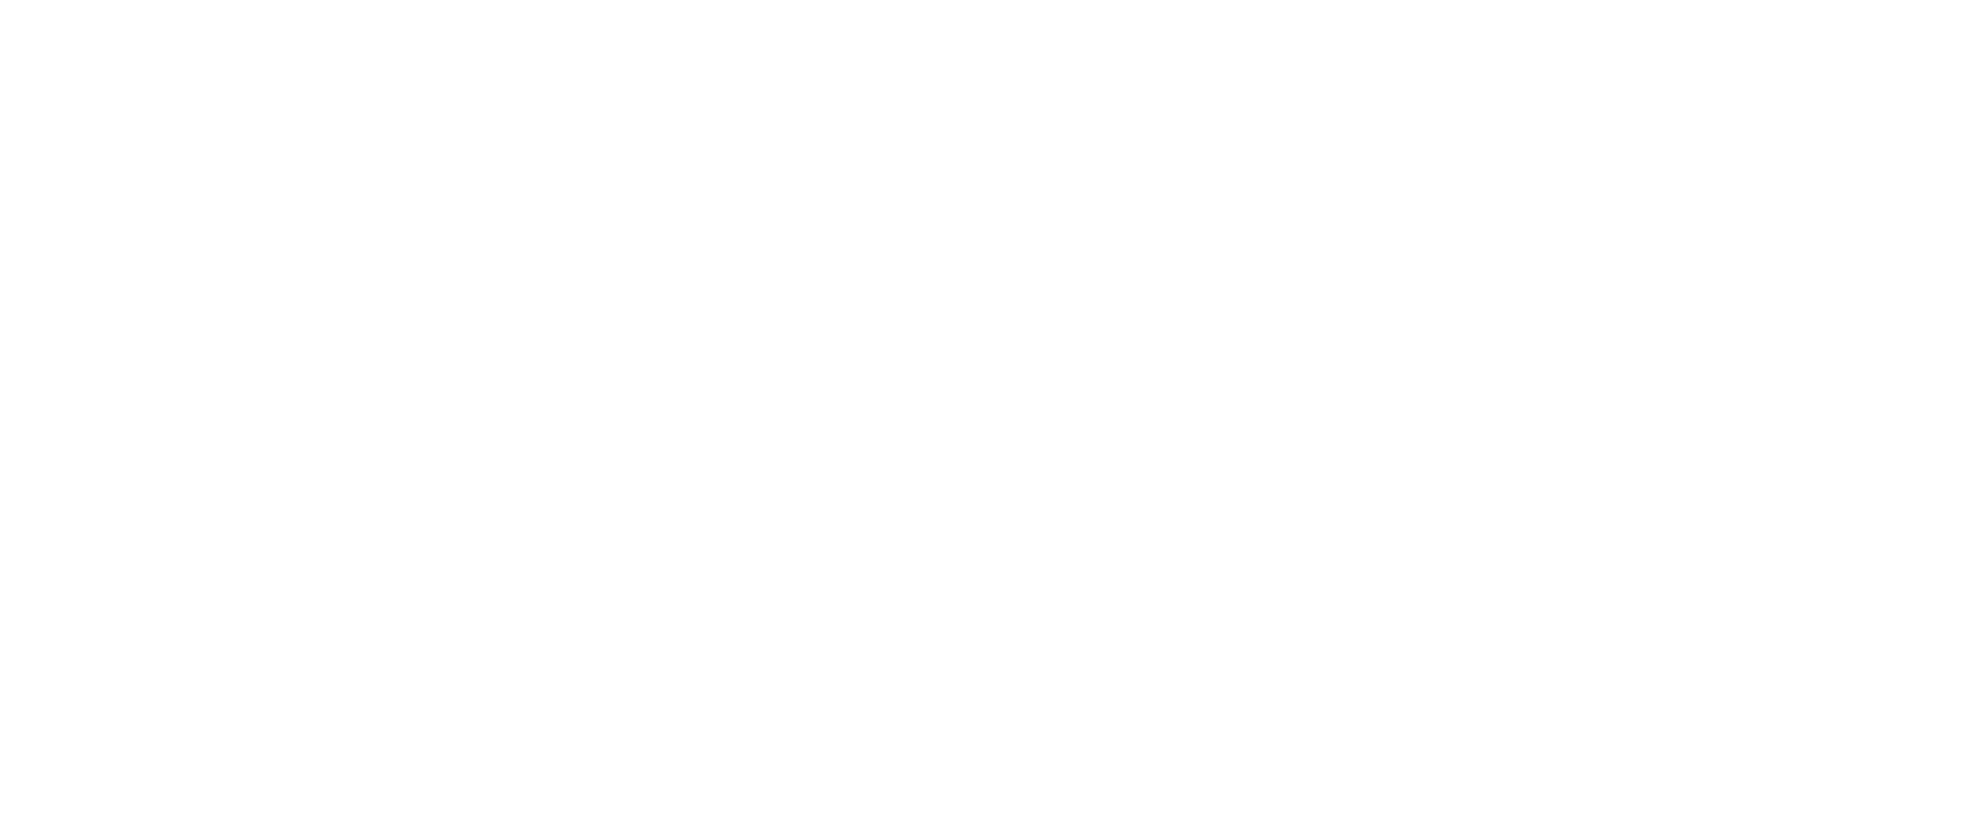 Scape Academy